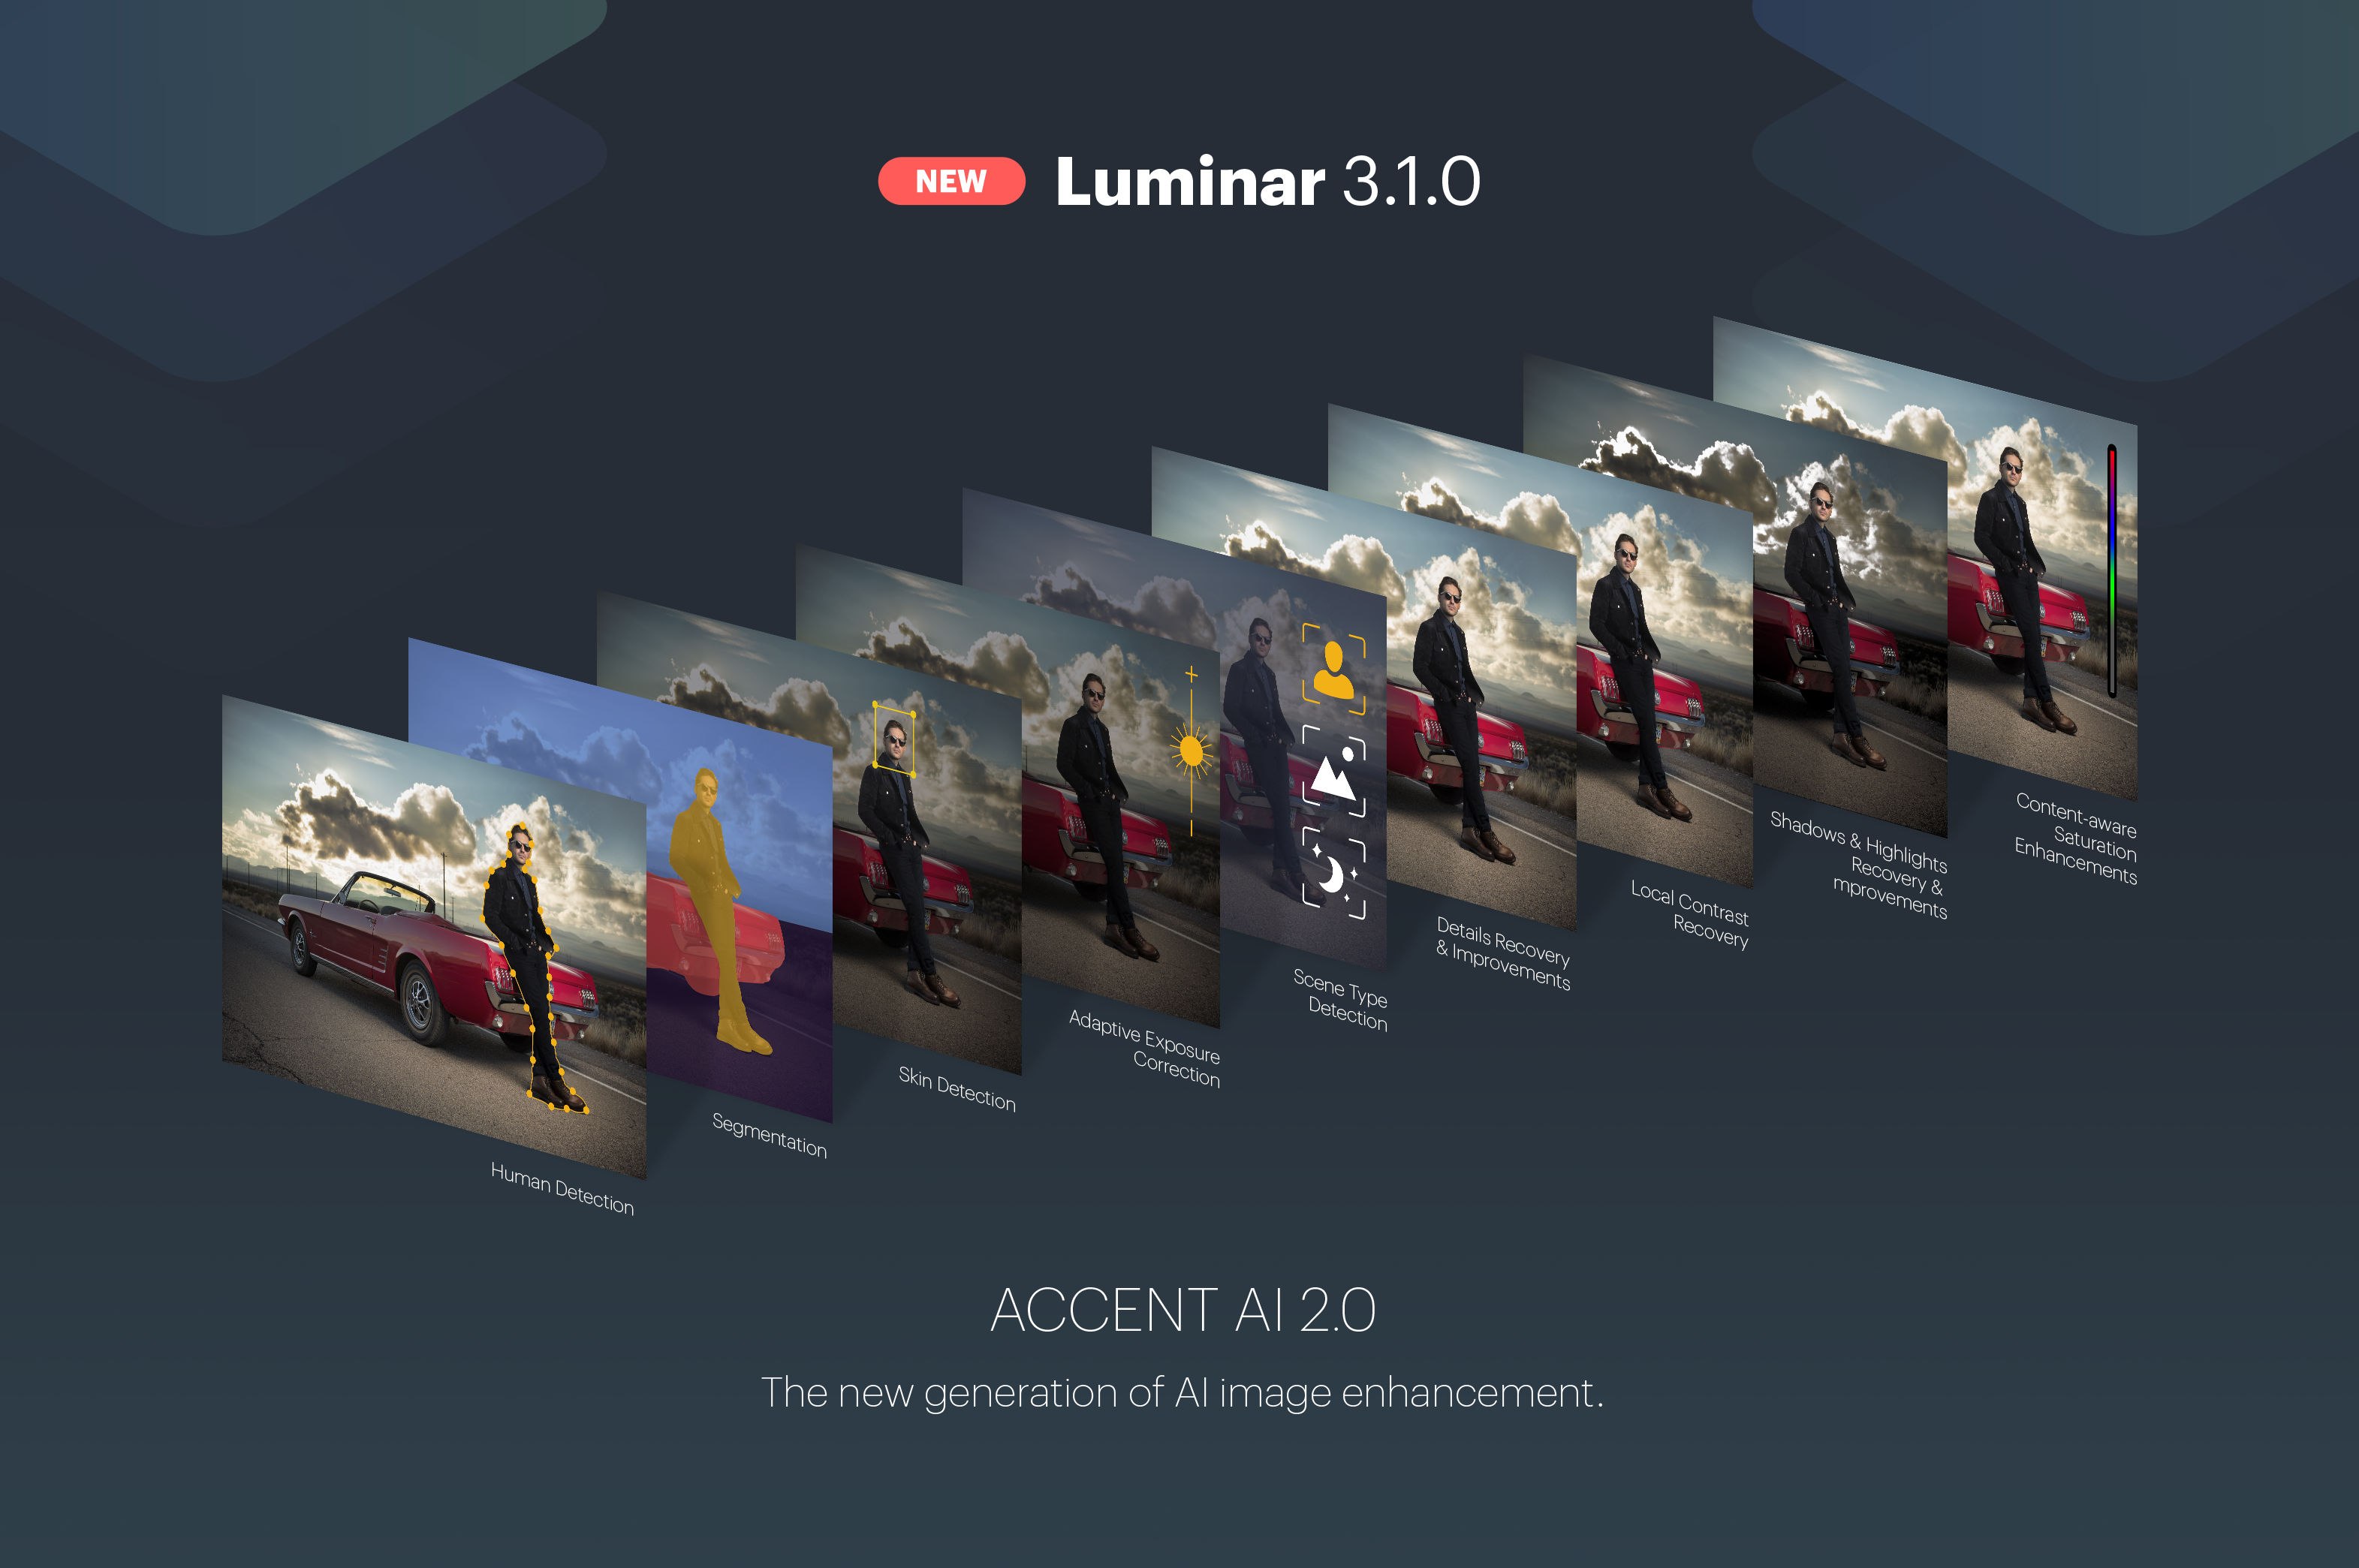 Luminar 3.1.0 Features “Completely Human-Aware” Accent AI Filter